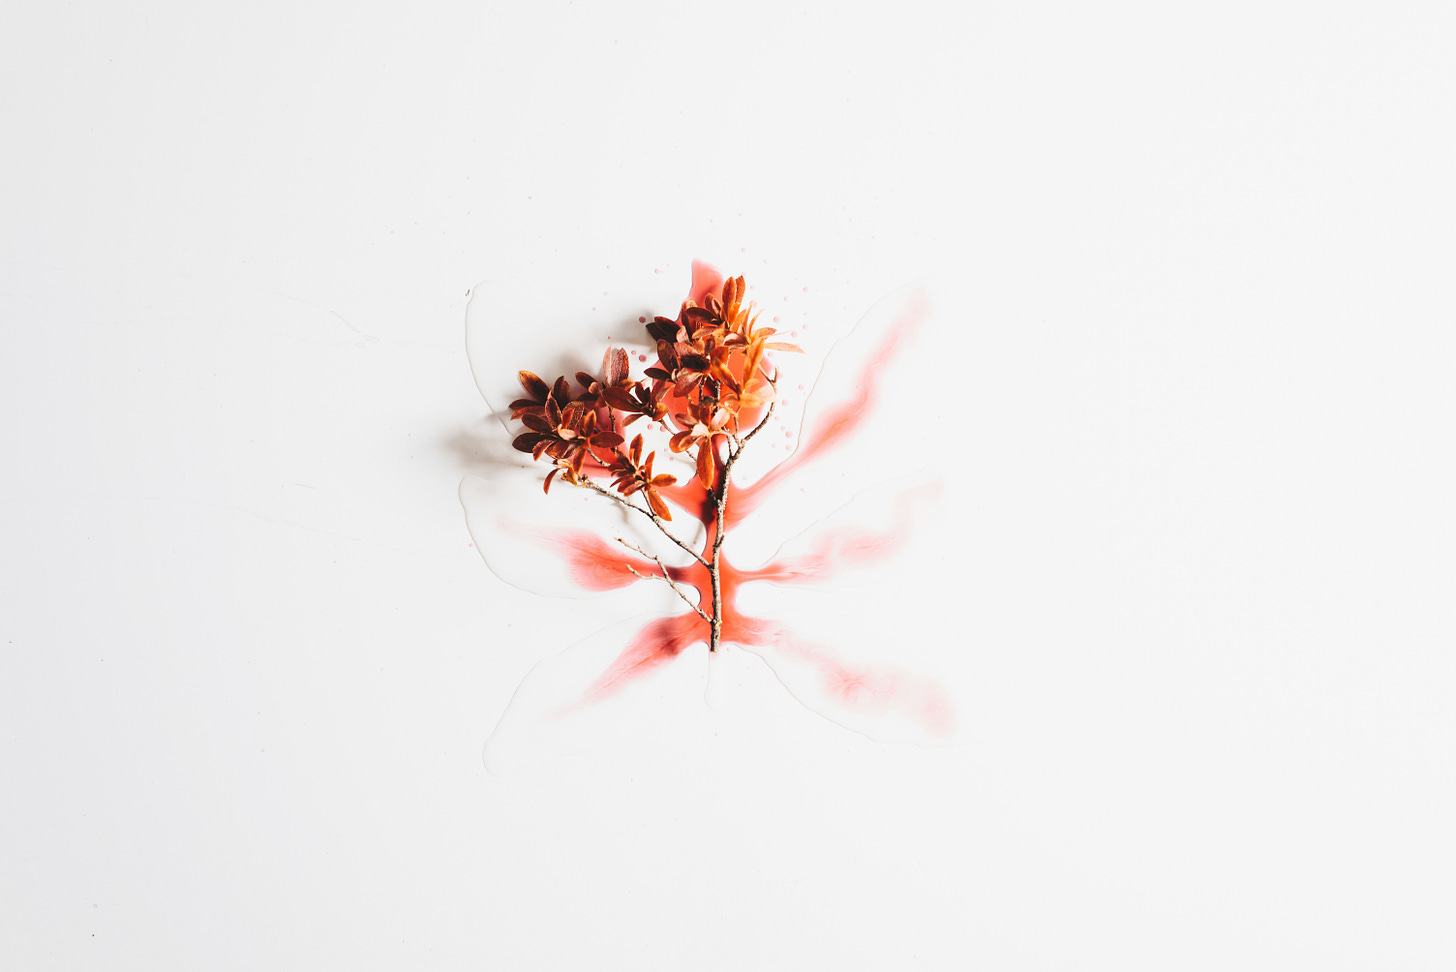 Abstract minimalist photo of a red leaved plant and symmetrical blotting of reddish ink